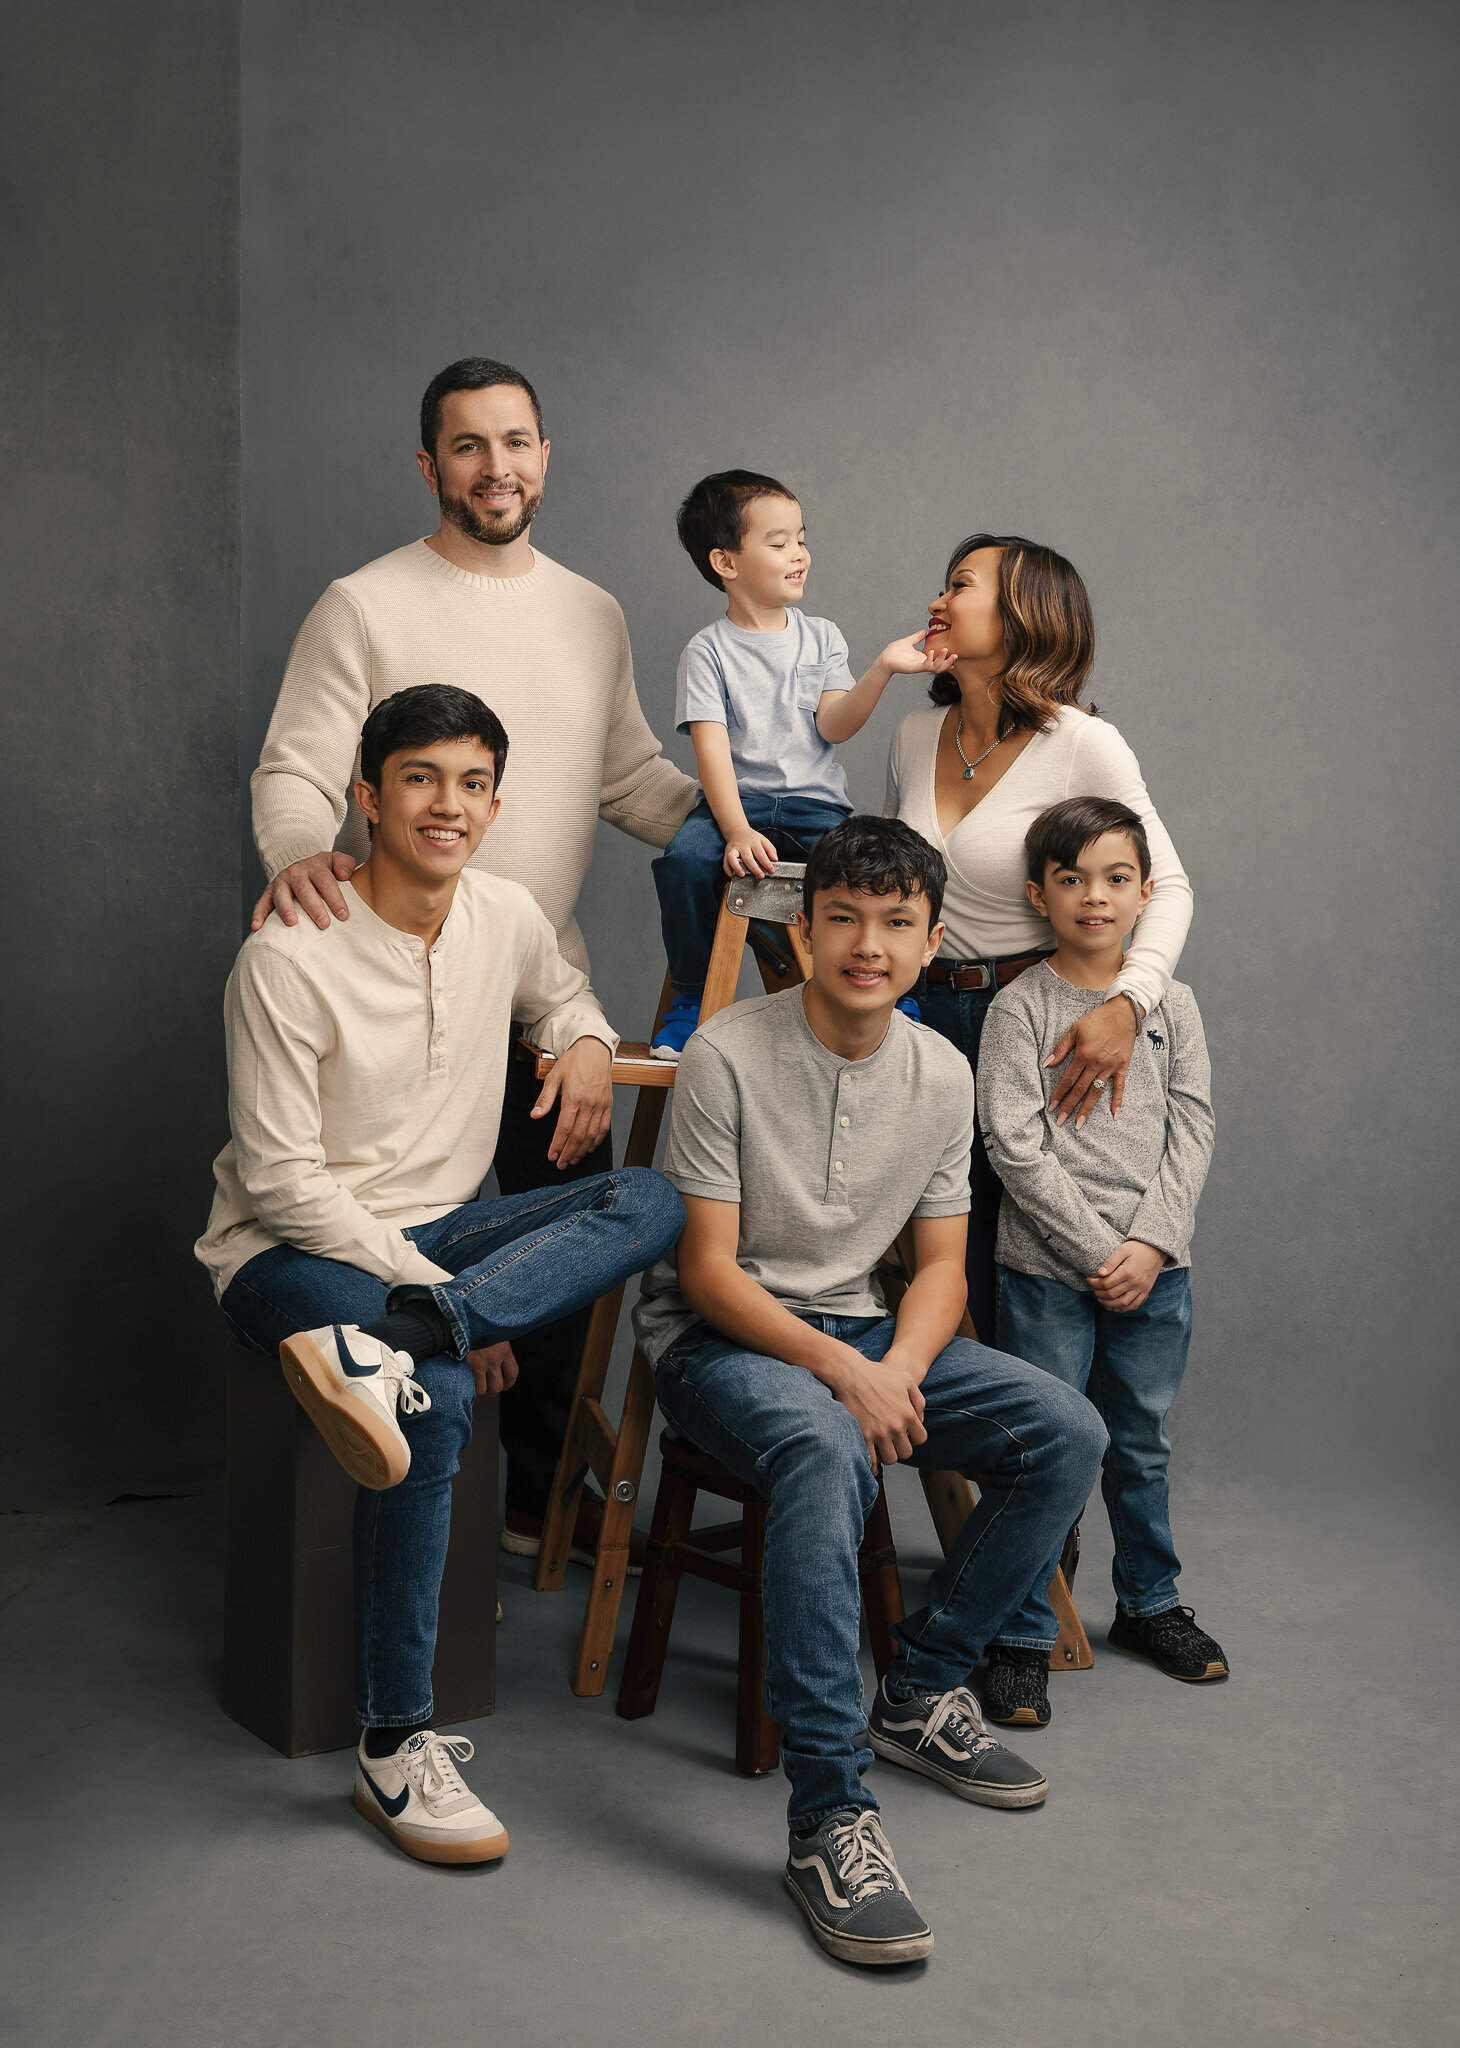 Casual studio portrait of a family by Mayumi Acosta Photography